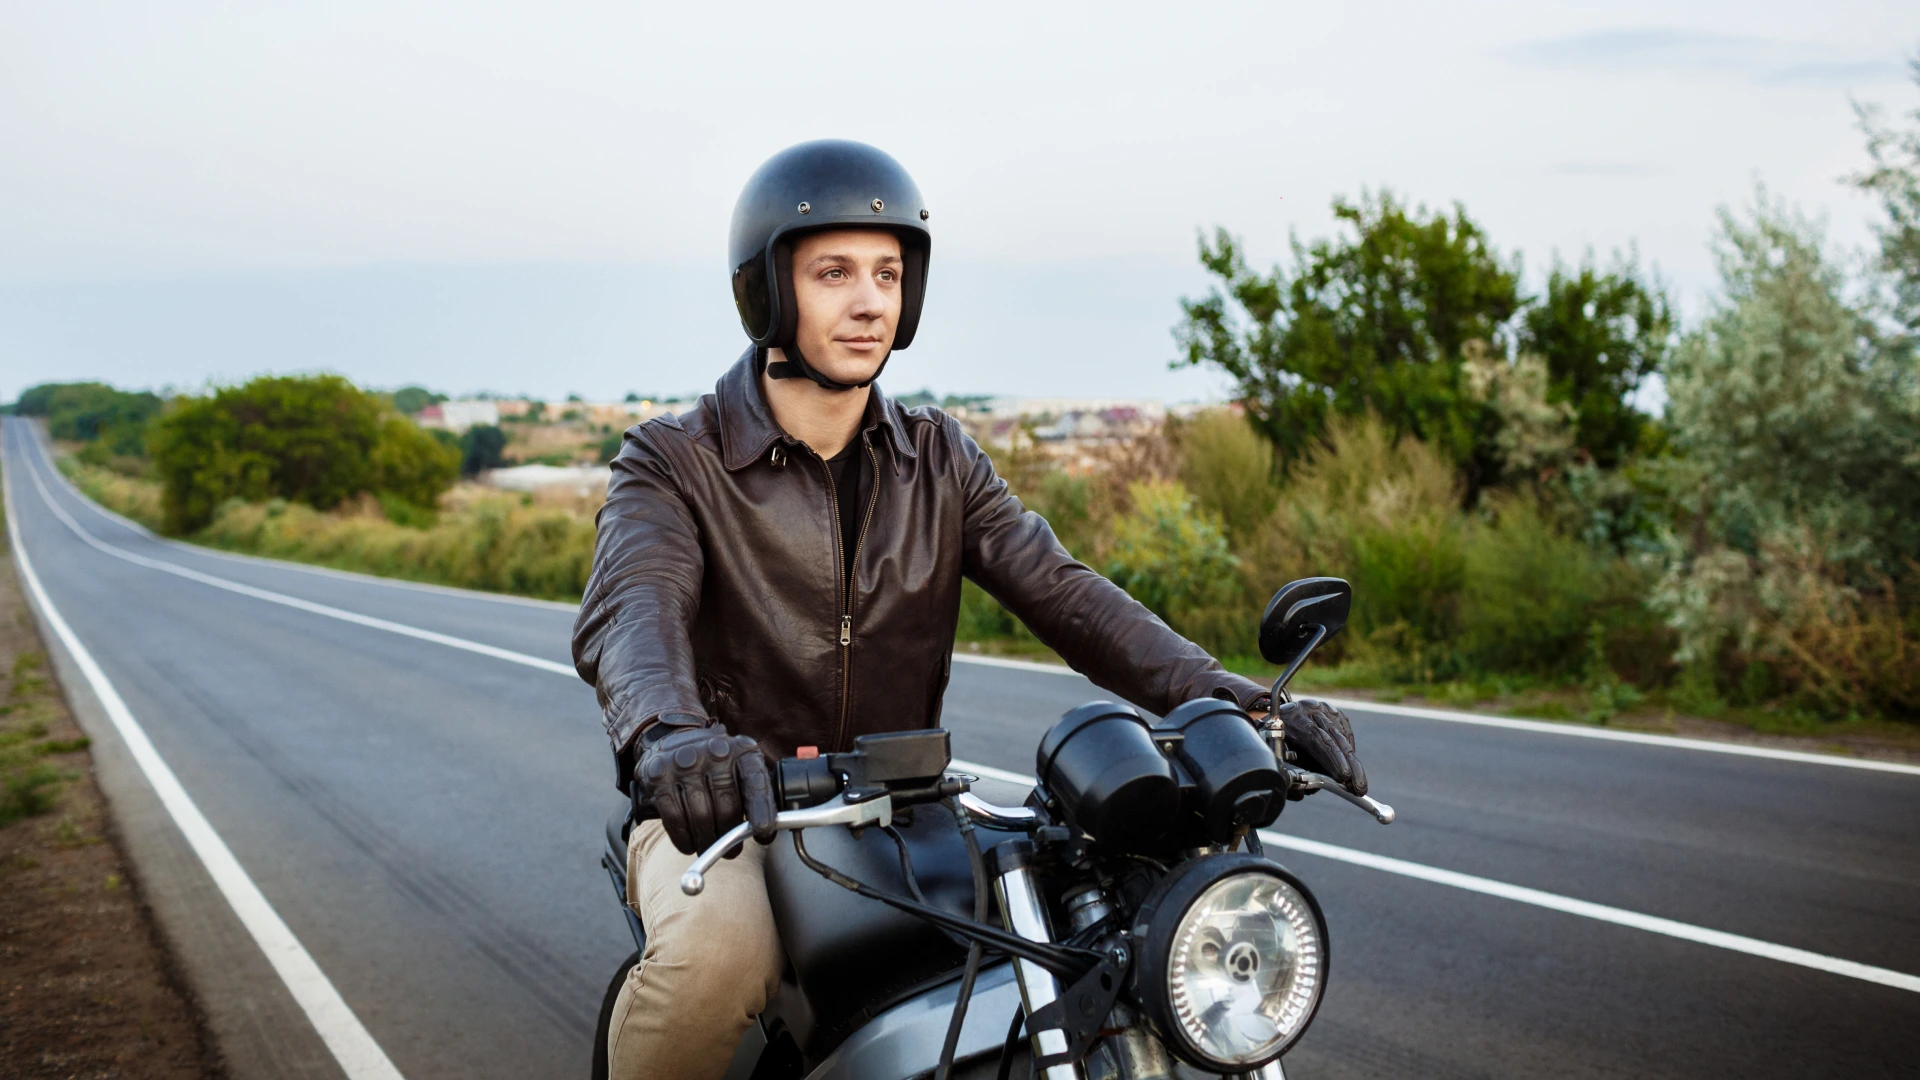 Top 5 Two-Wheelers for College Students in India